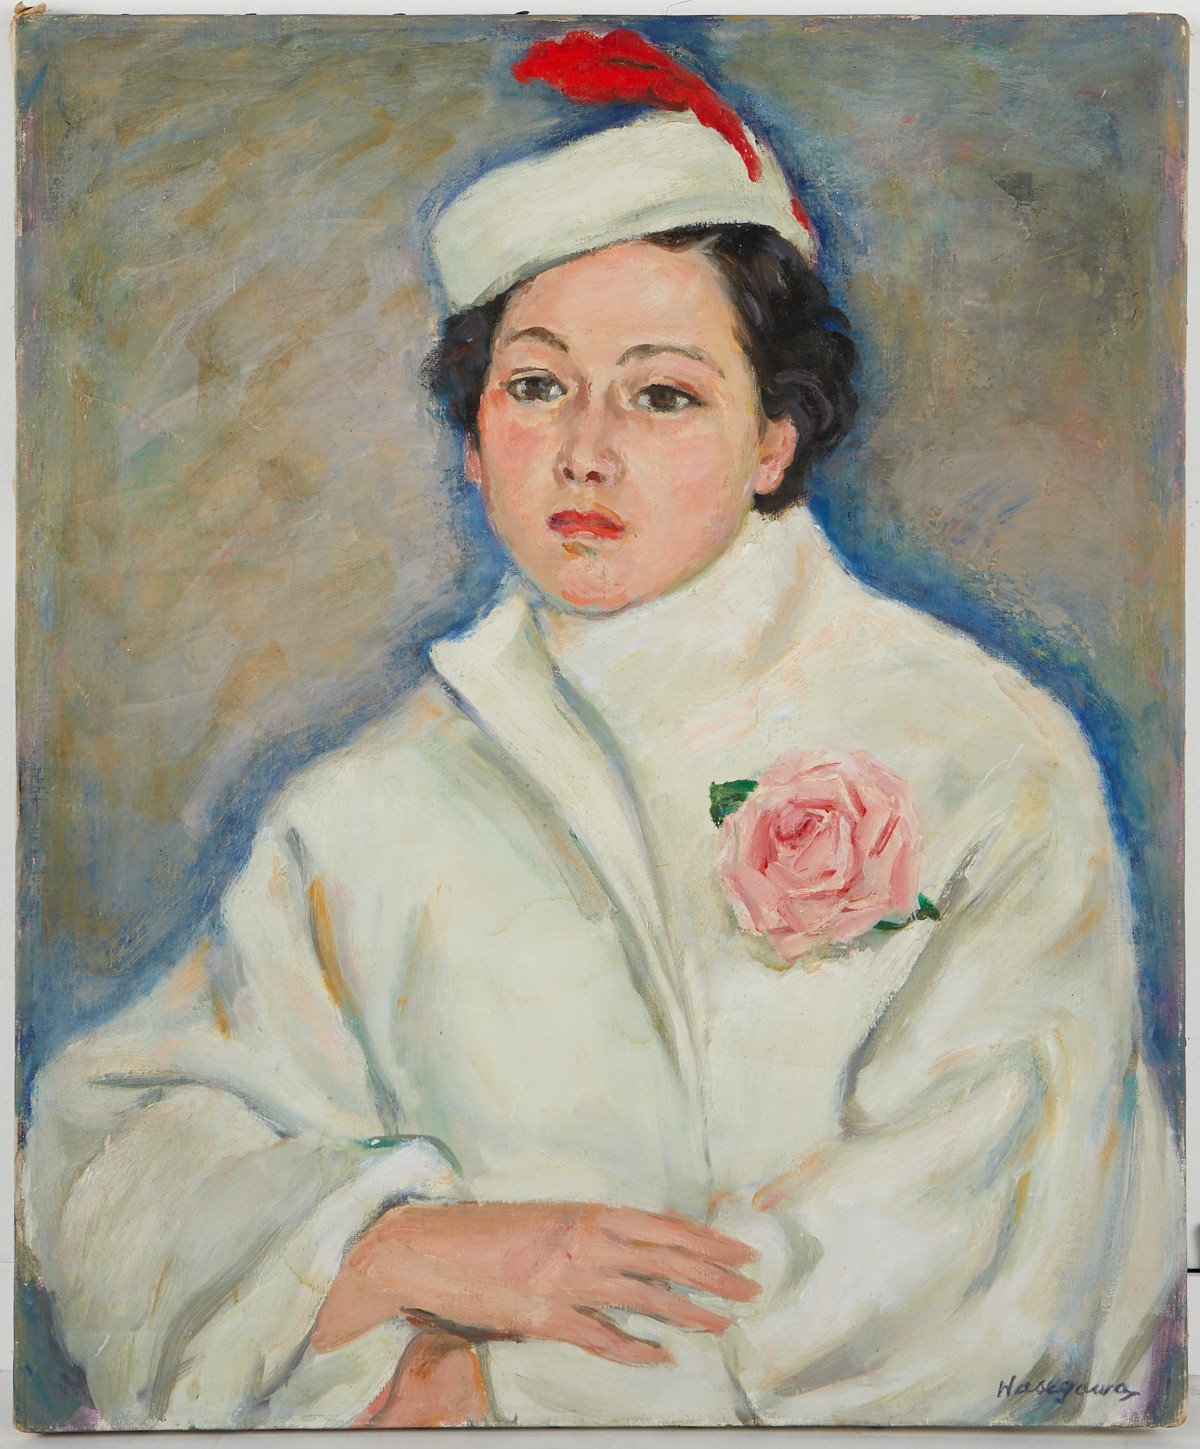 Hasegawa Portrait of Woman in White Coat - Image 2 of 7